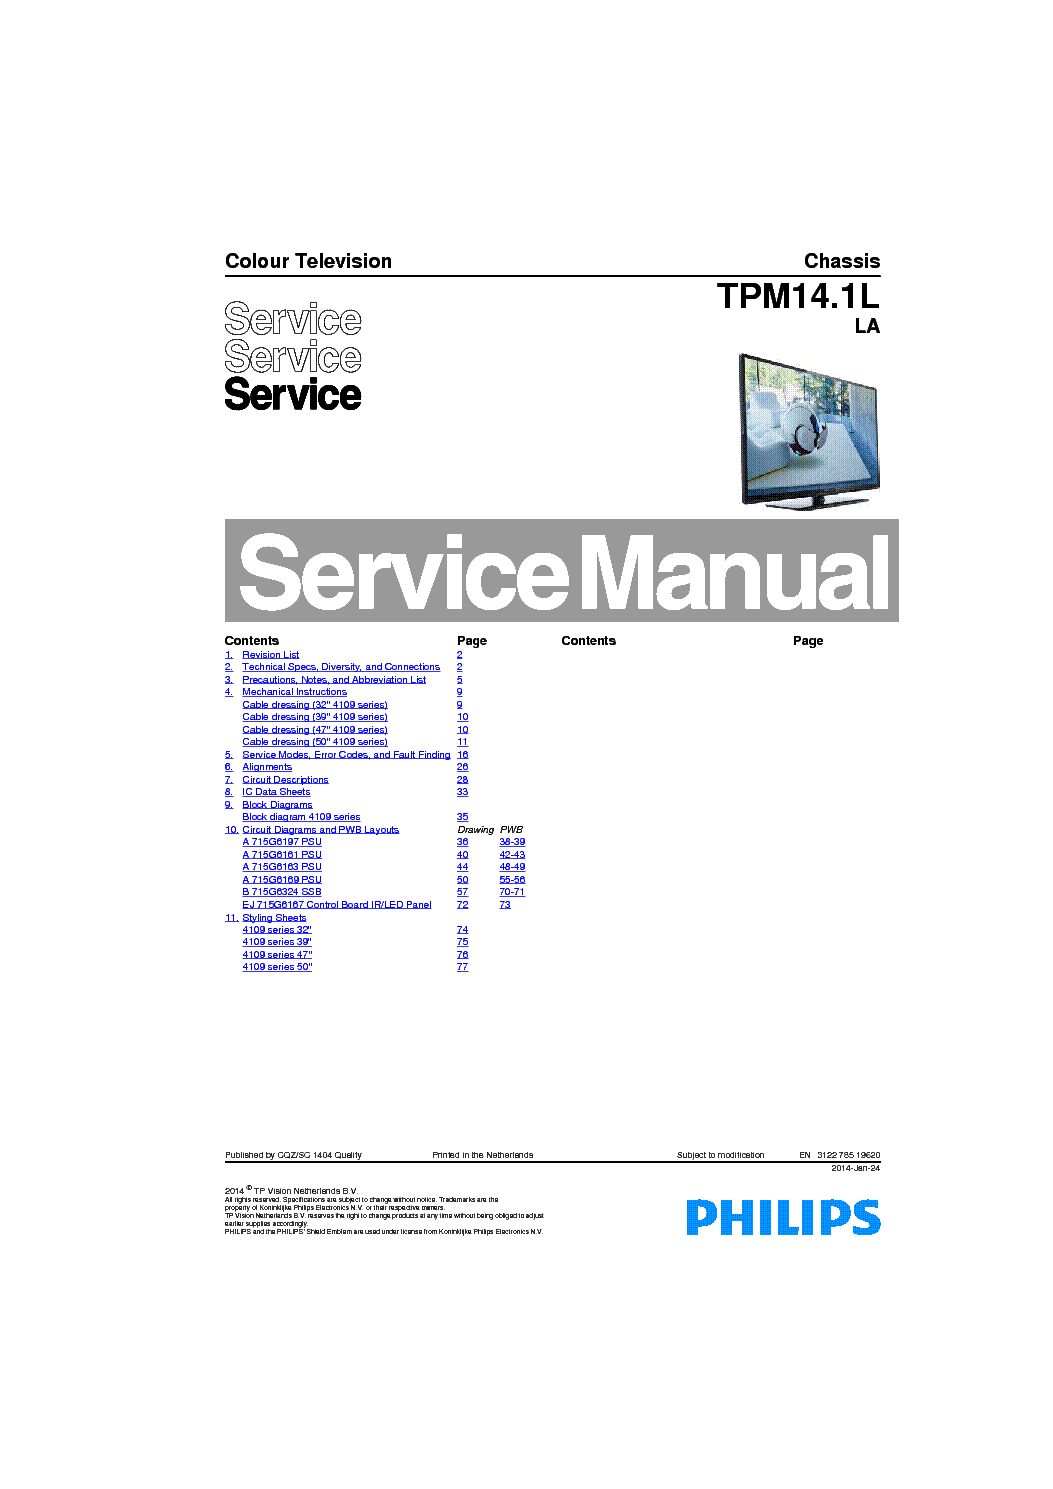 PHILIPS TPM14.1LLA 312278519620 service manual (1st page)